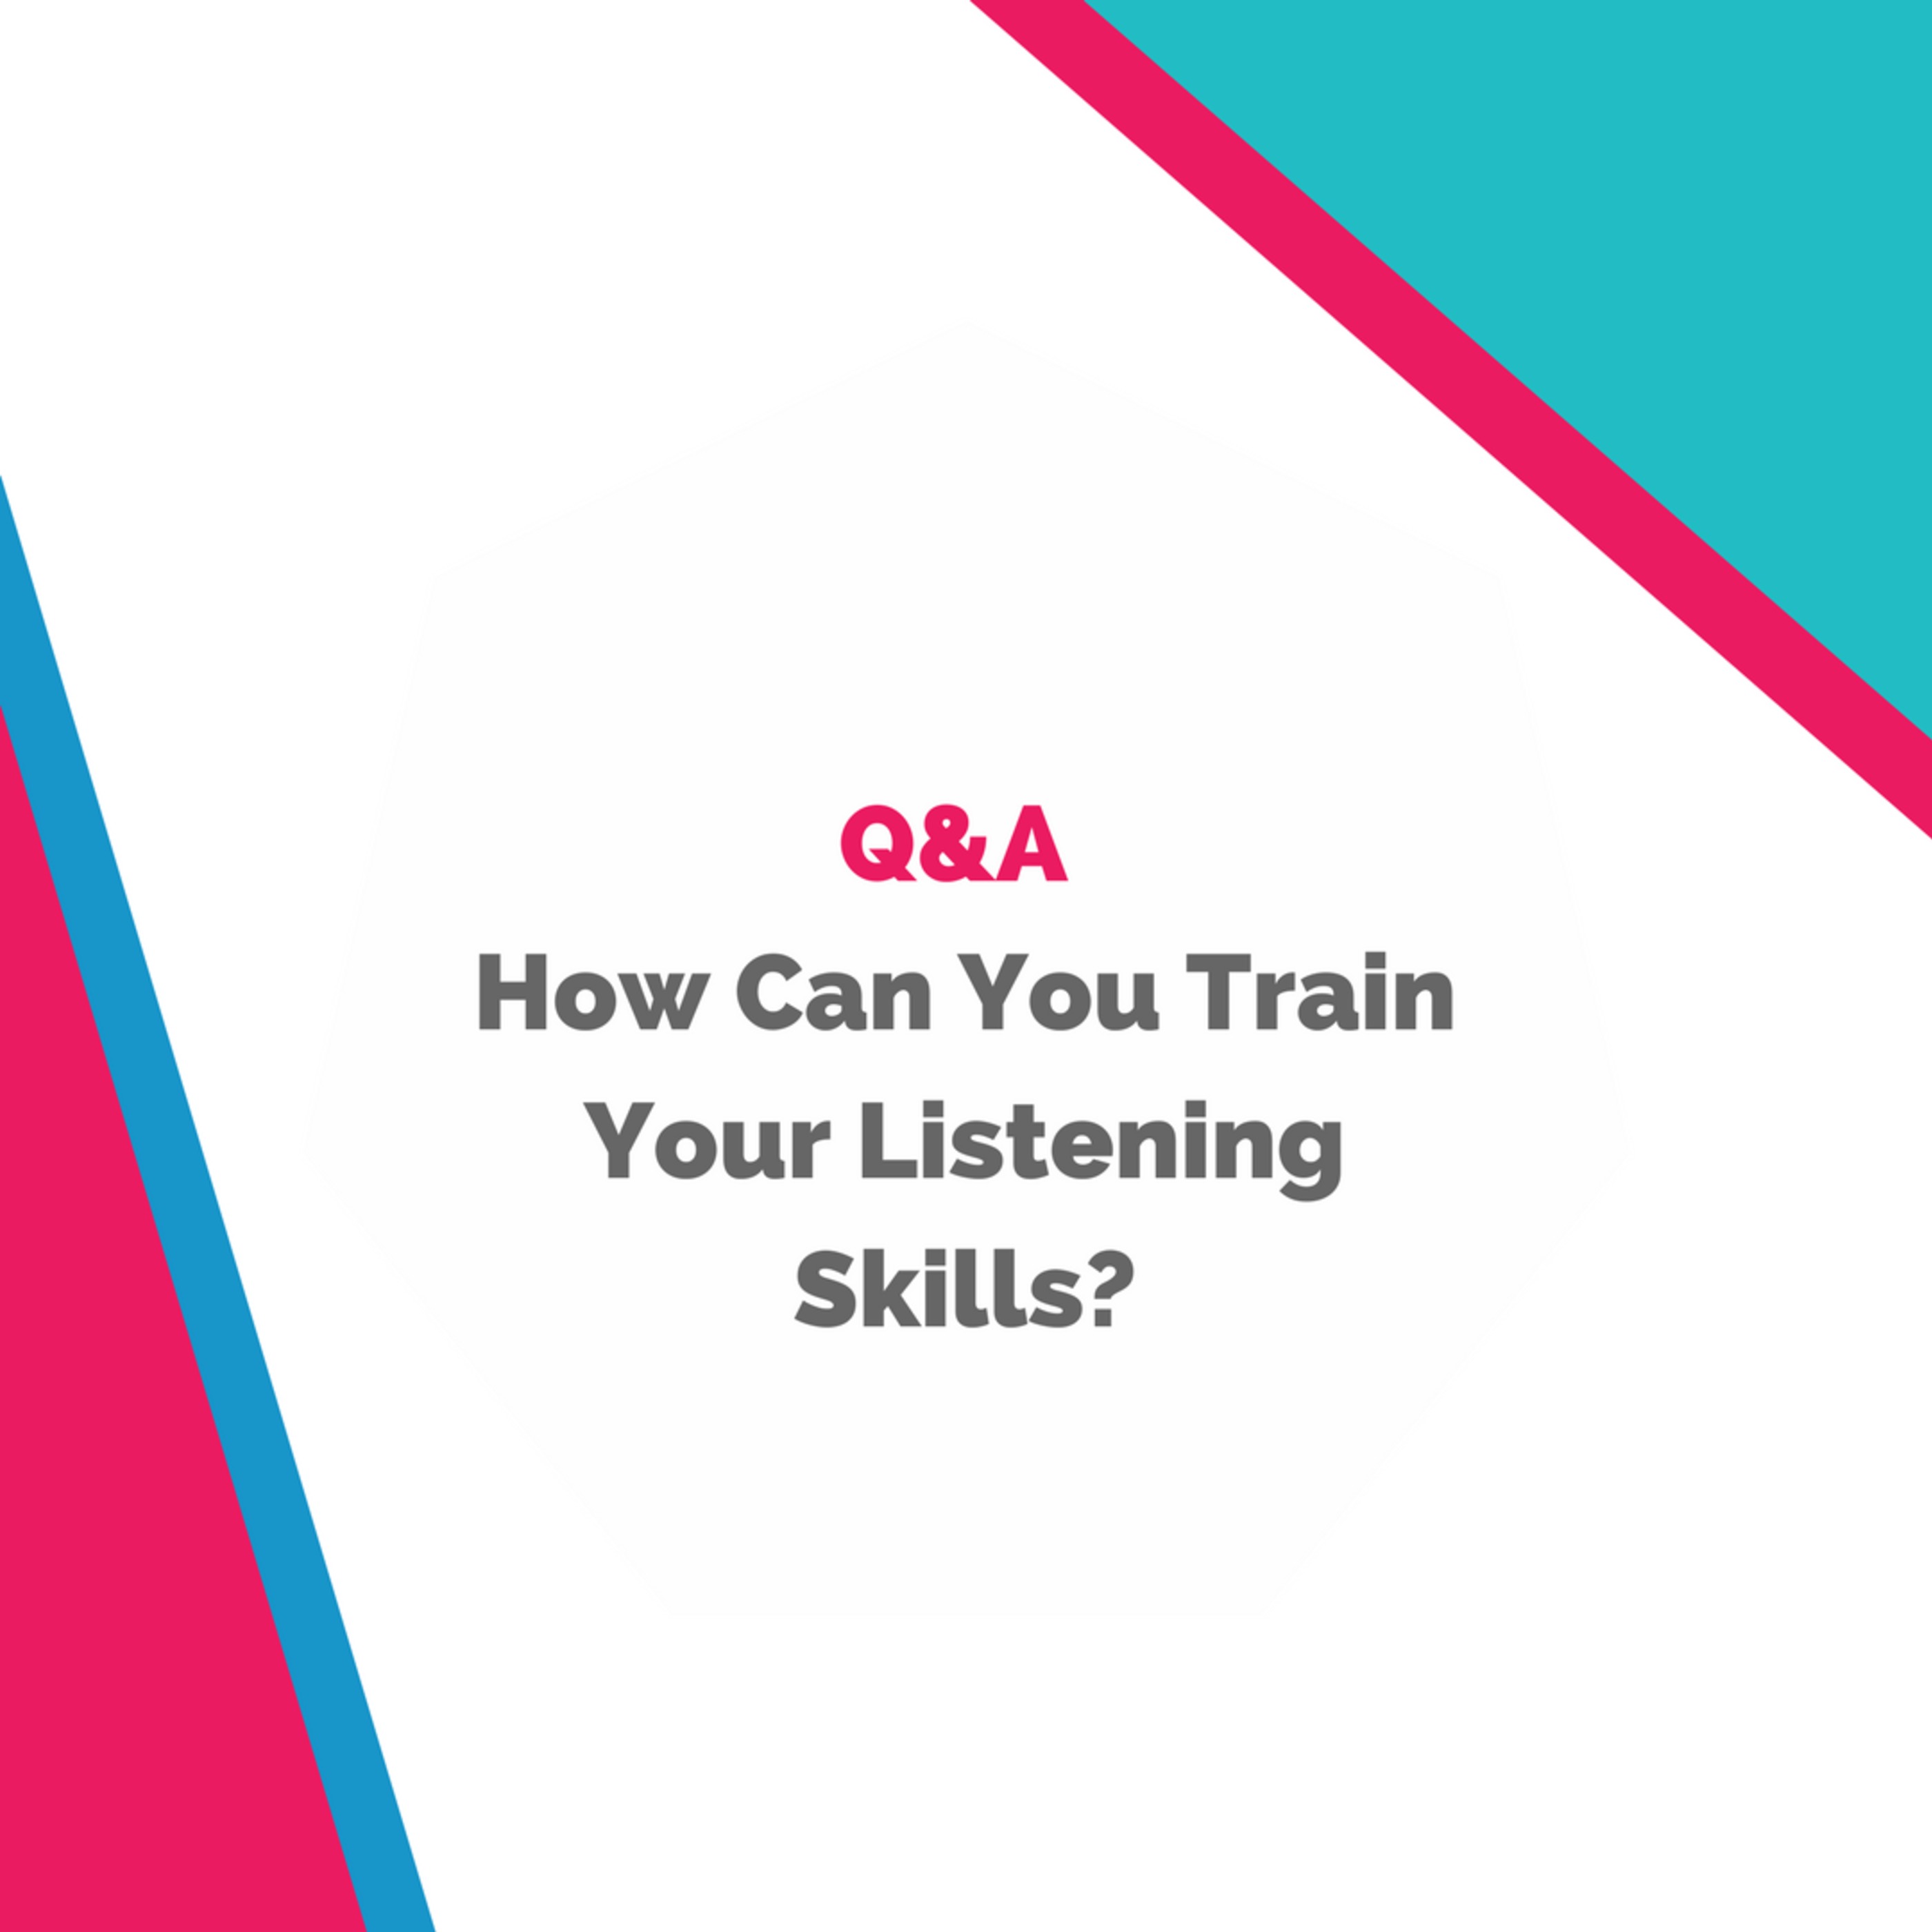 Q&A: How Can You Train Your Listening Skills?